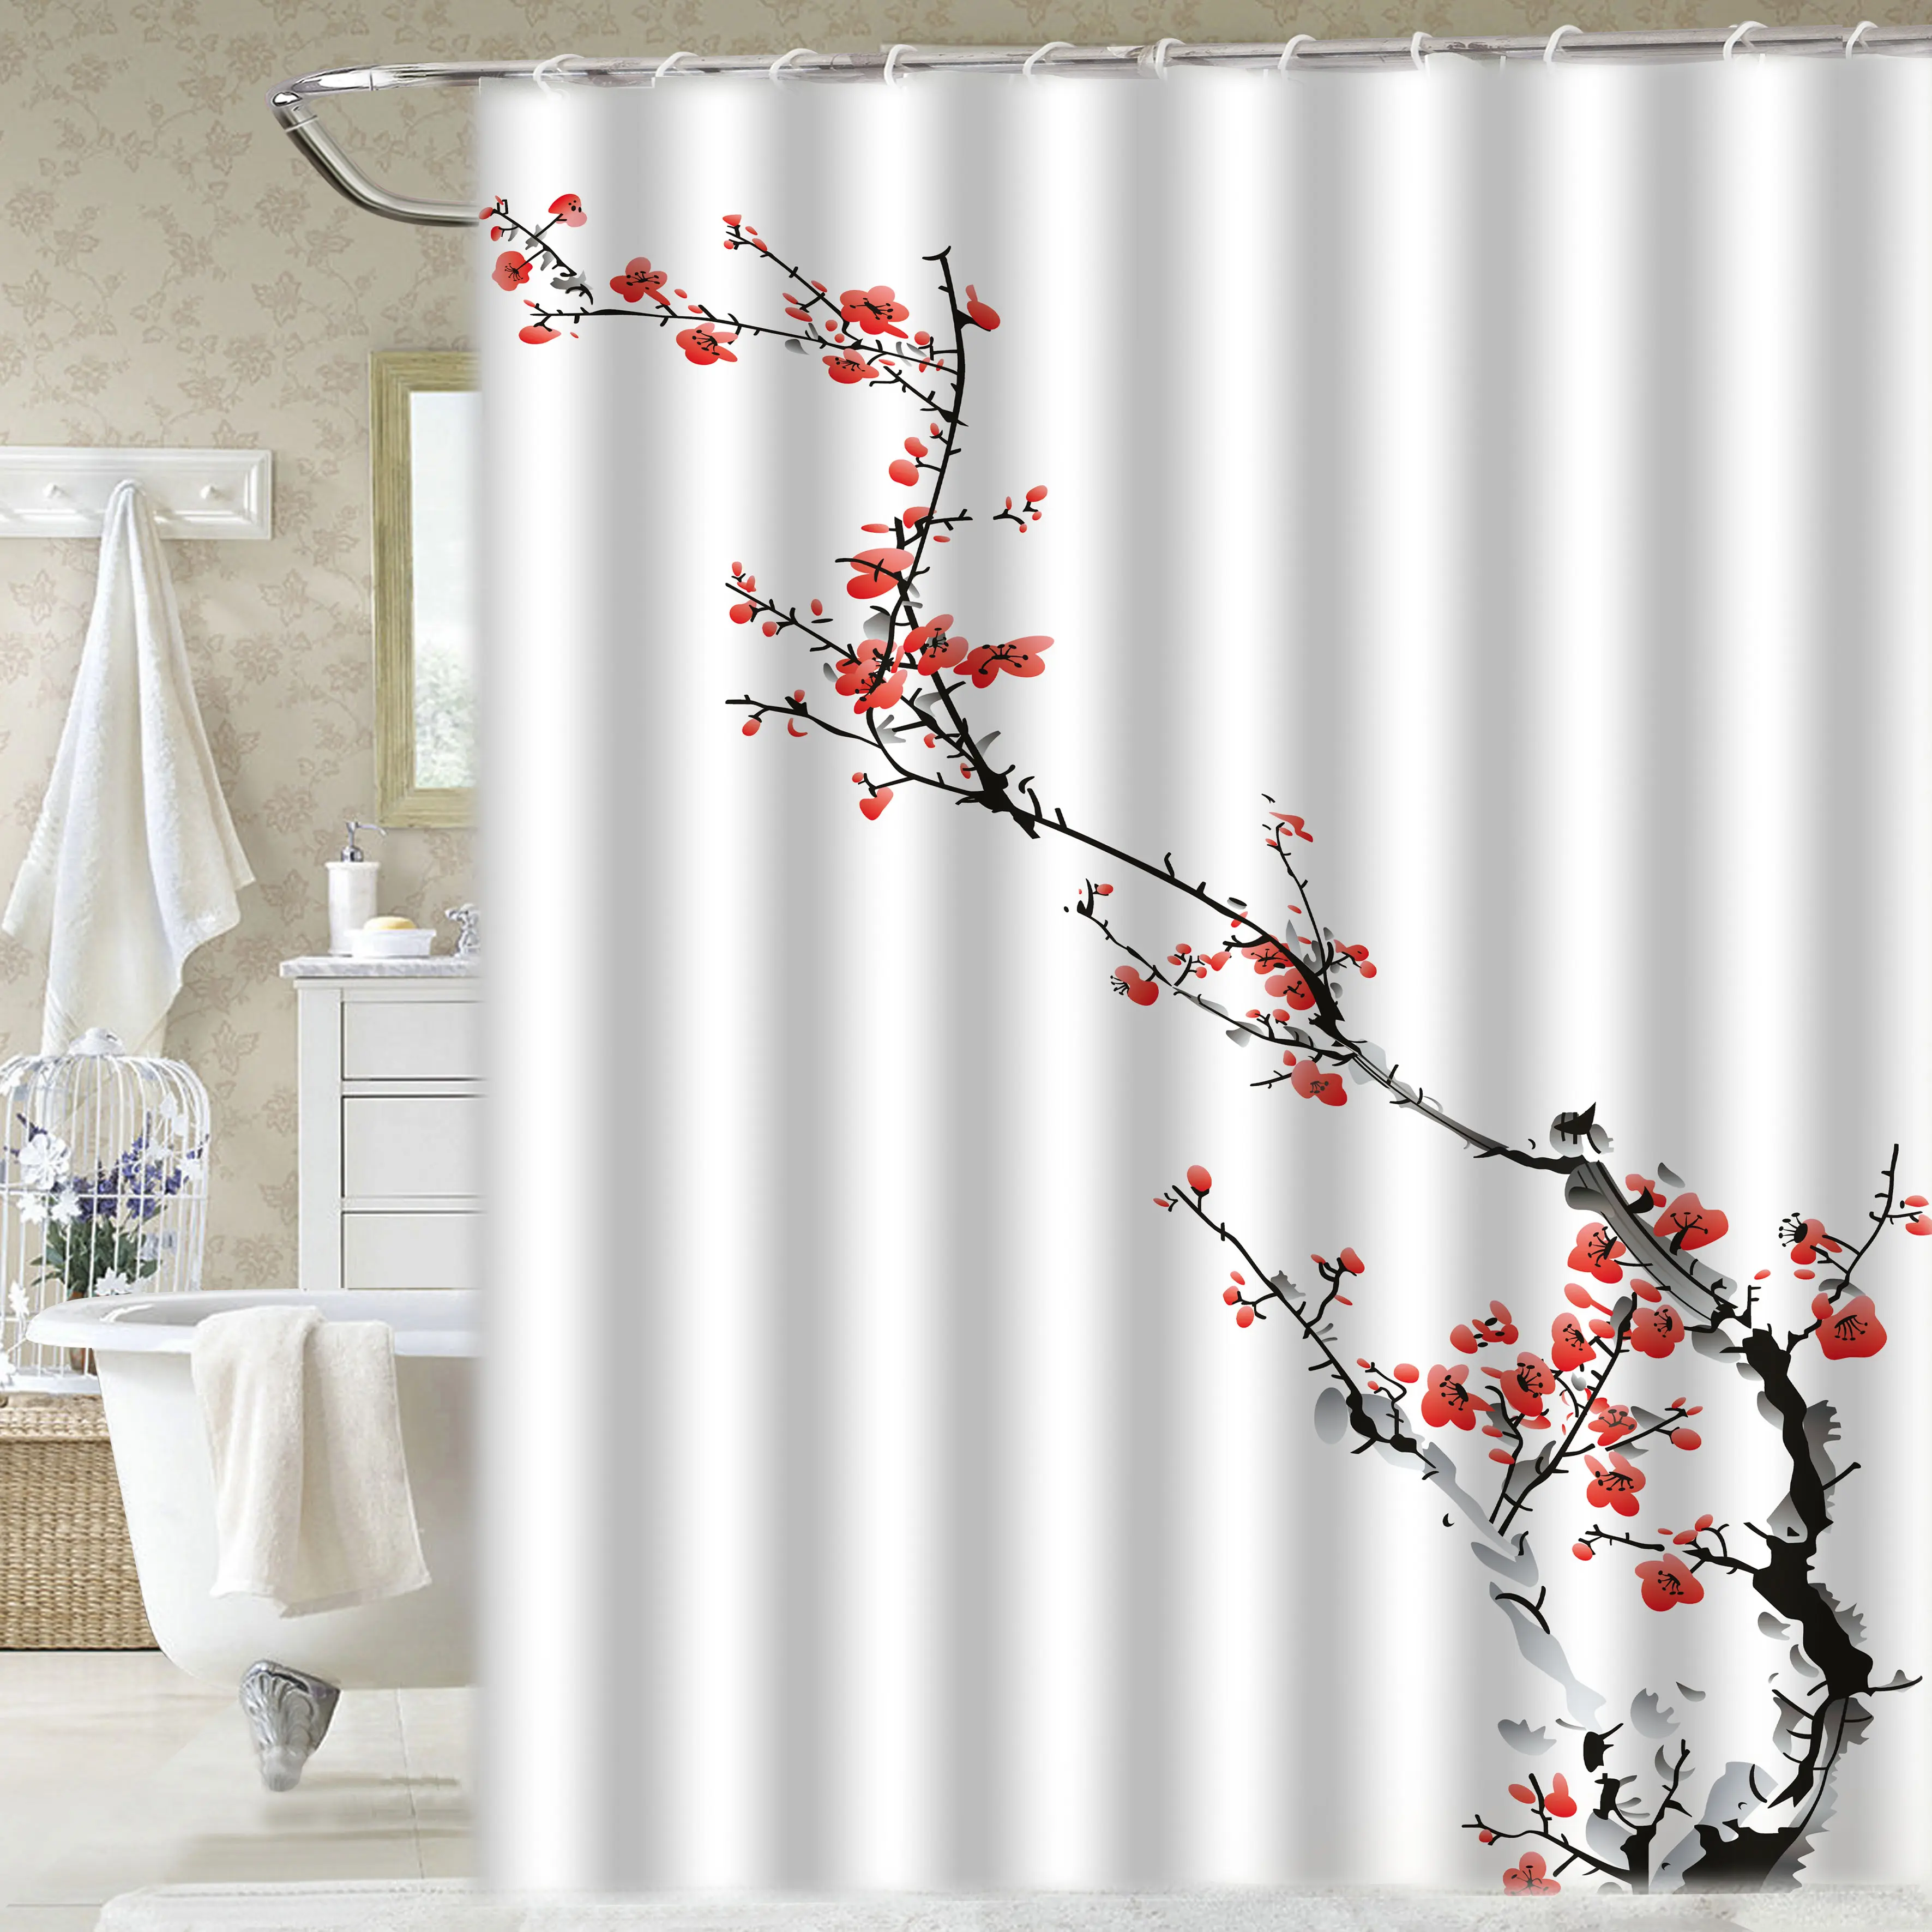 Wholesale Bathroom polyester Mouldproof 3d digital Printing Waterproof Fabric Shower Curtain with plum blossom